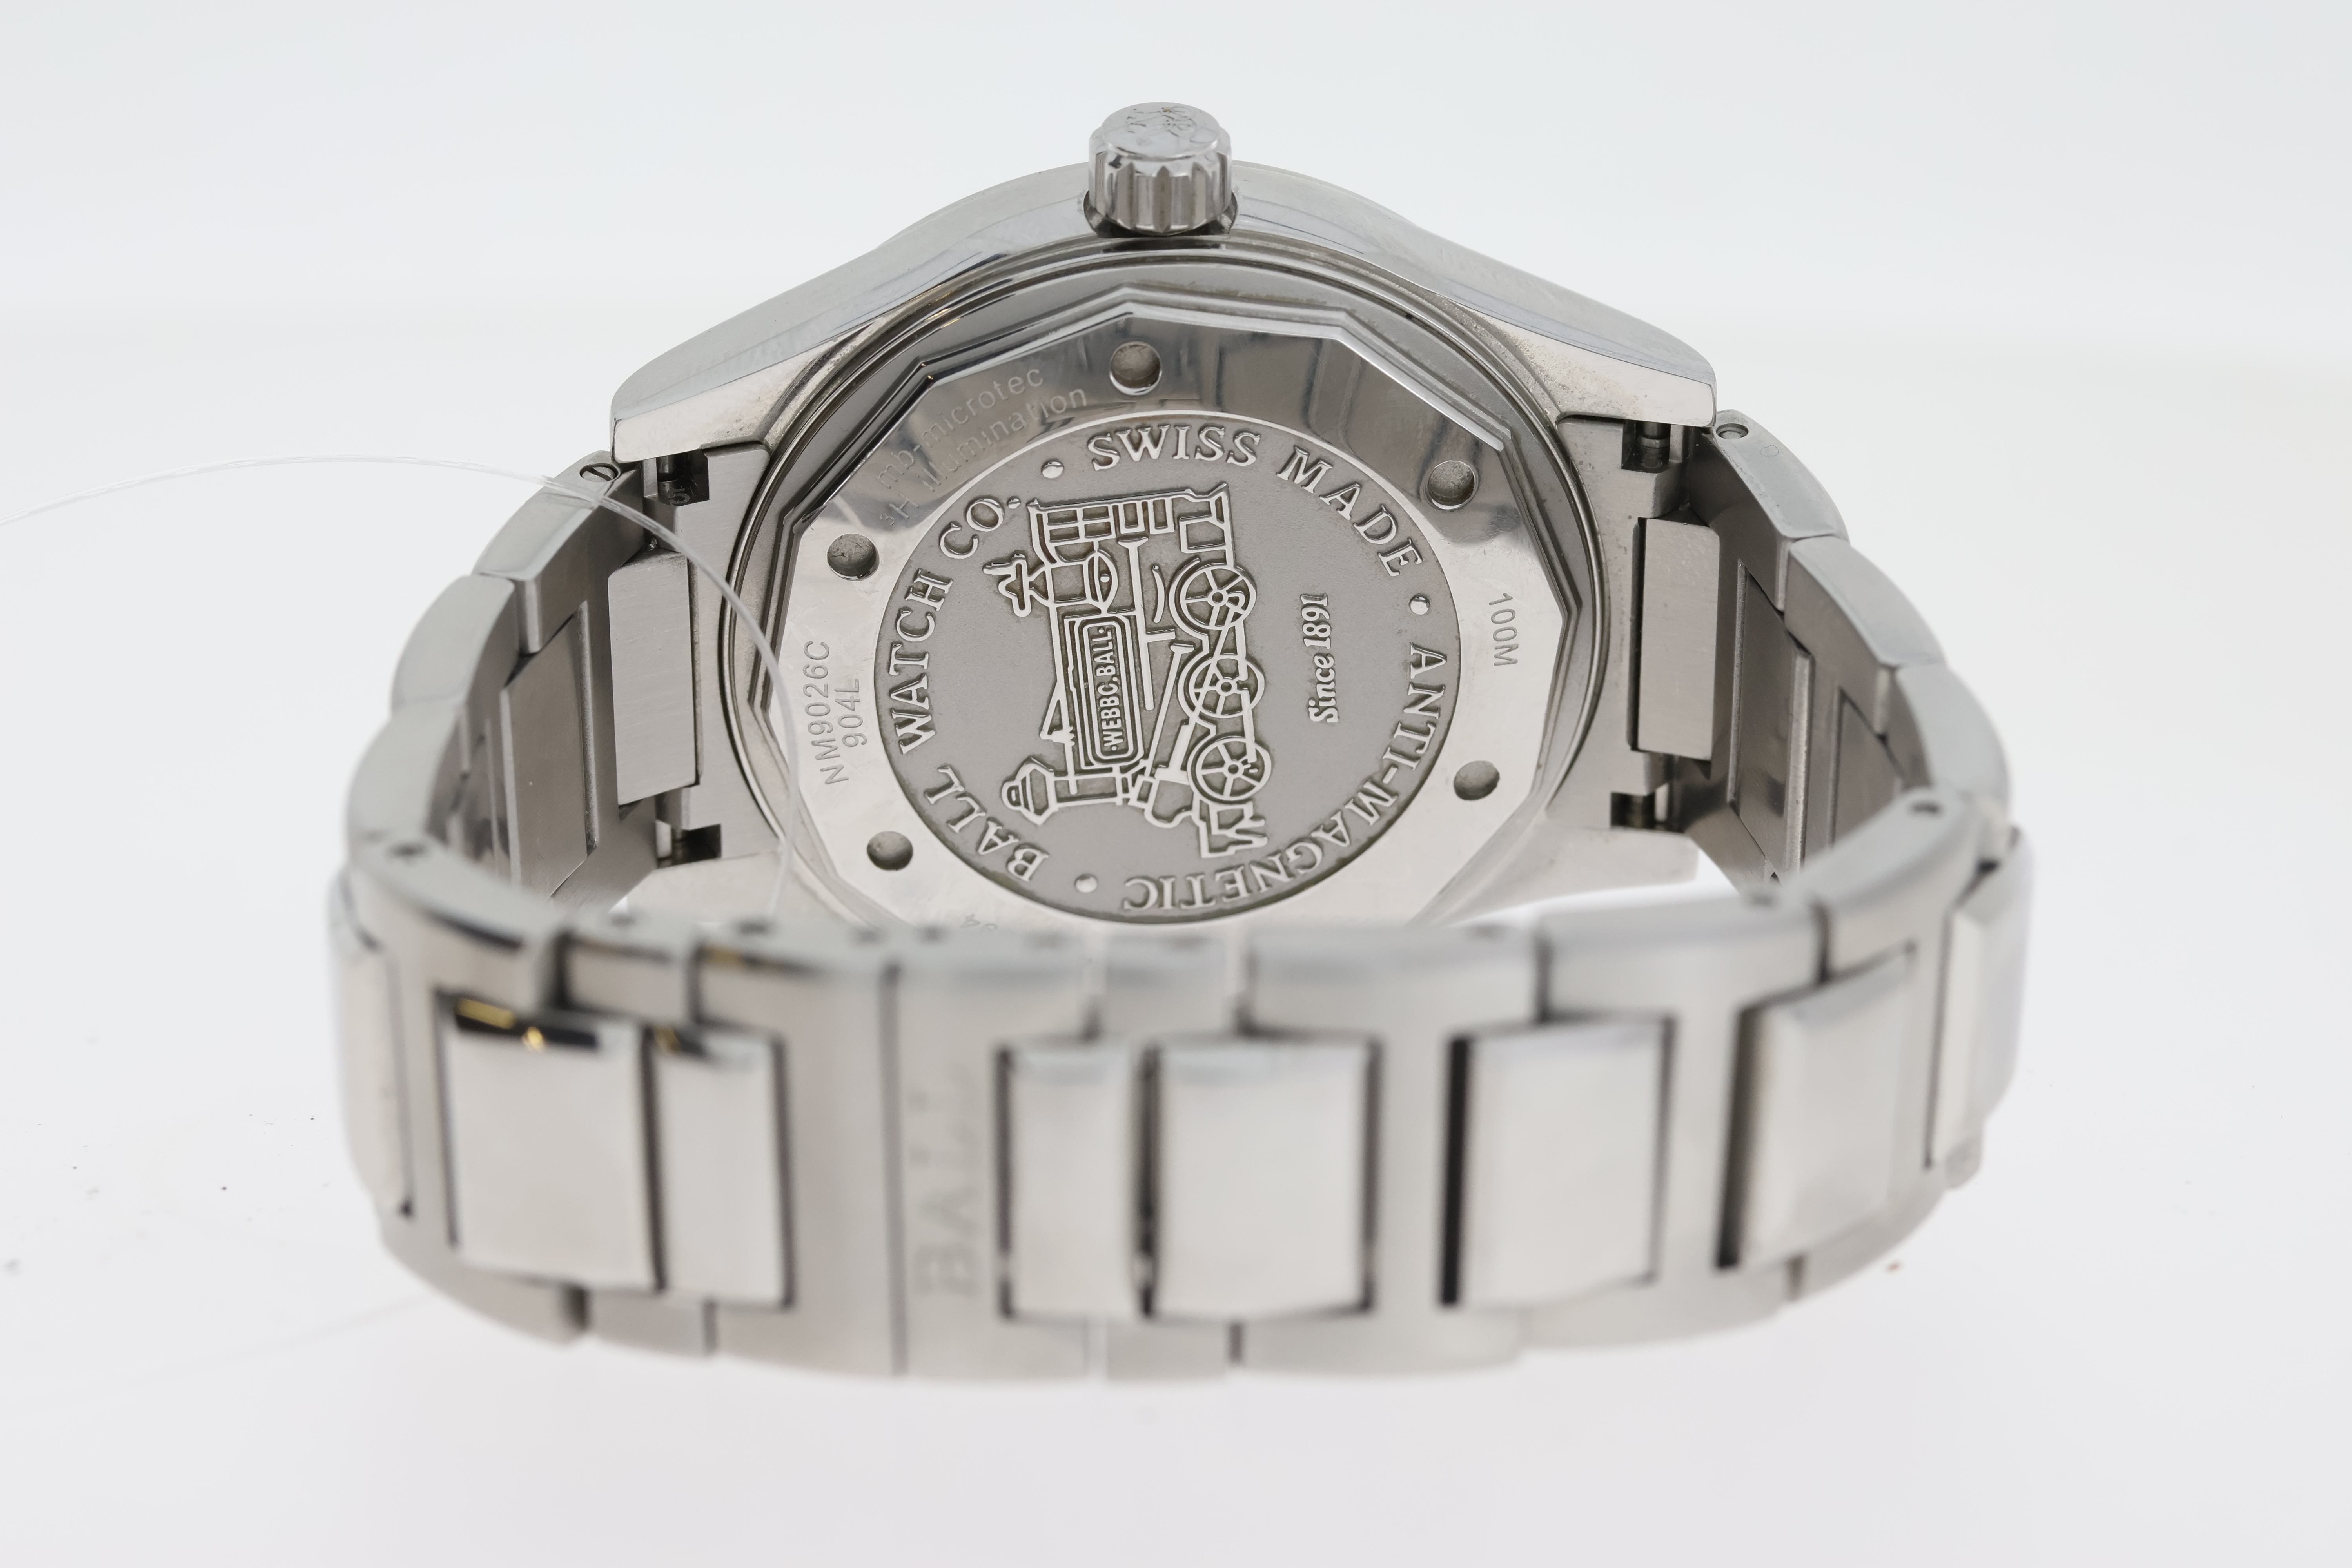 Ball Engineer III Maverlight Date Automatic with box and Papers - Image 6 of 6